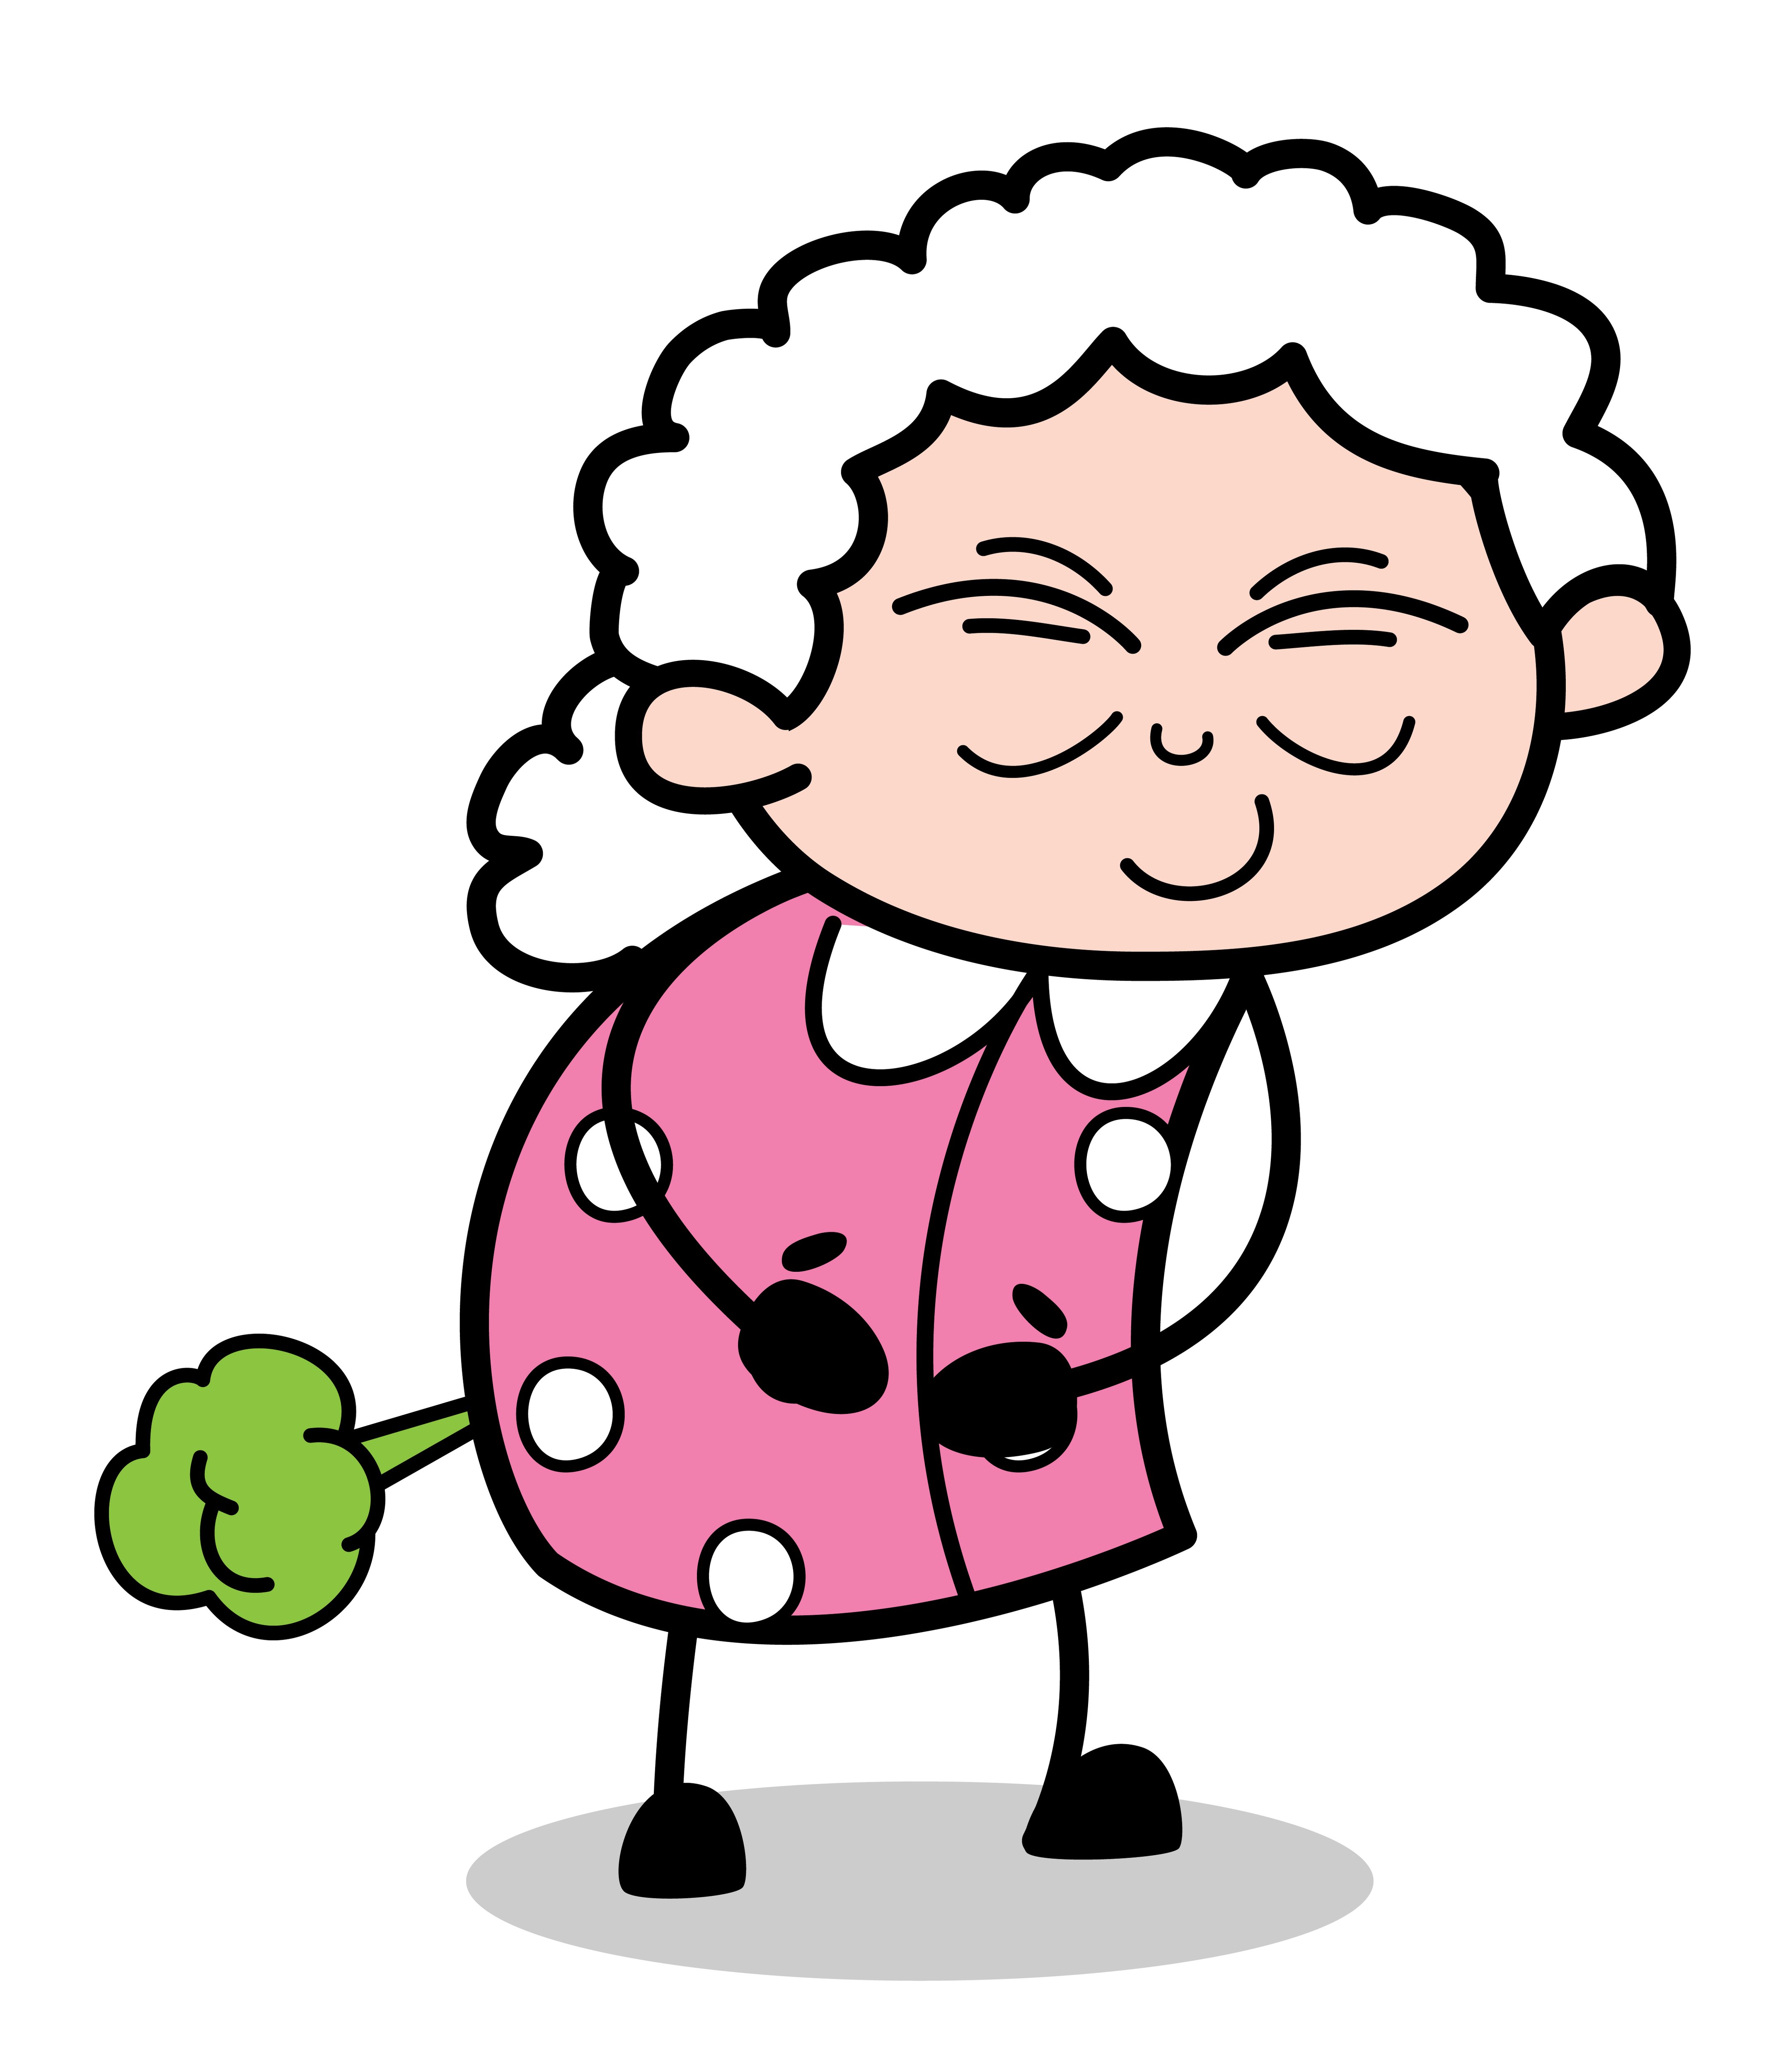 Old lady farts | Source: Shutterstock